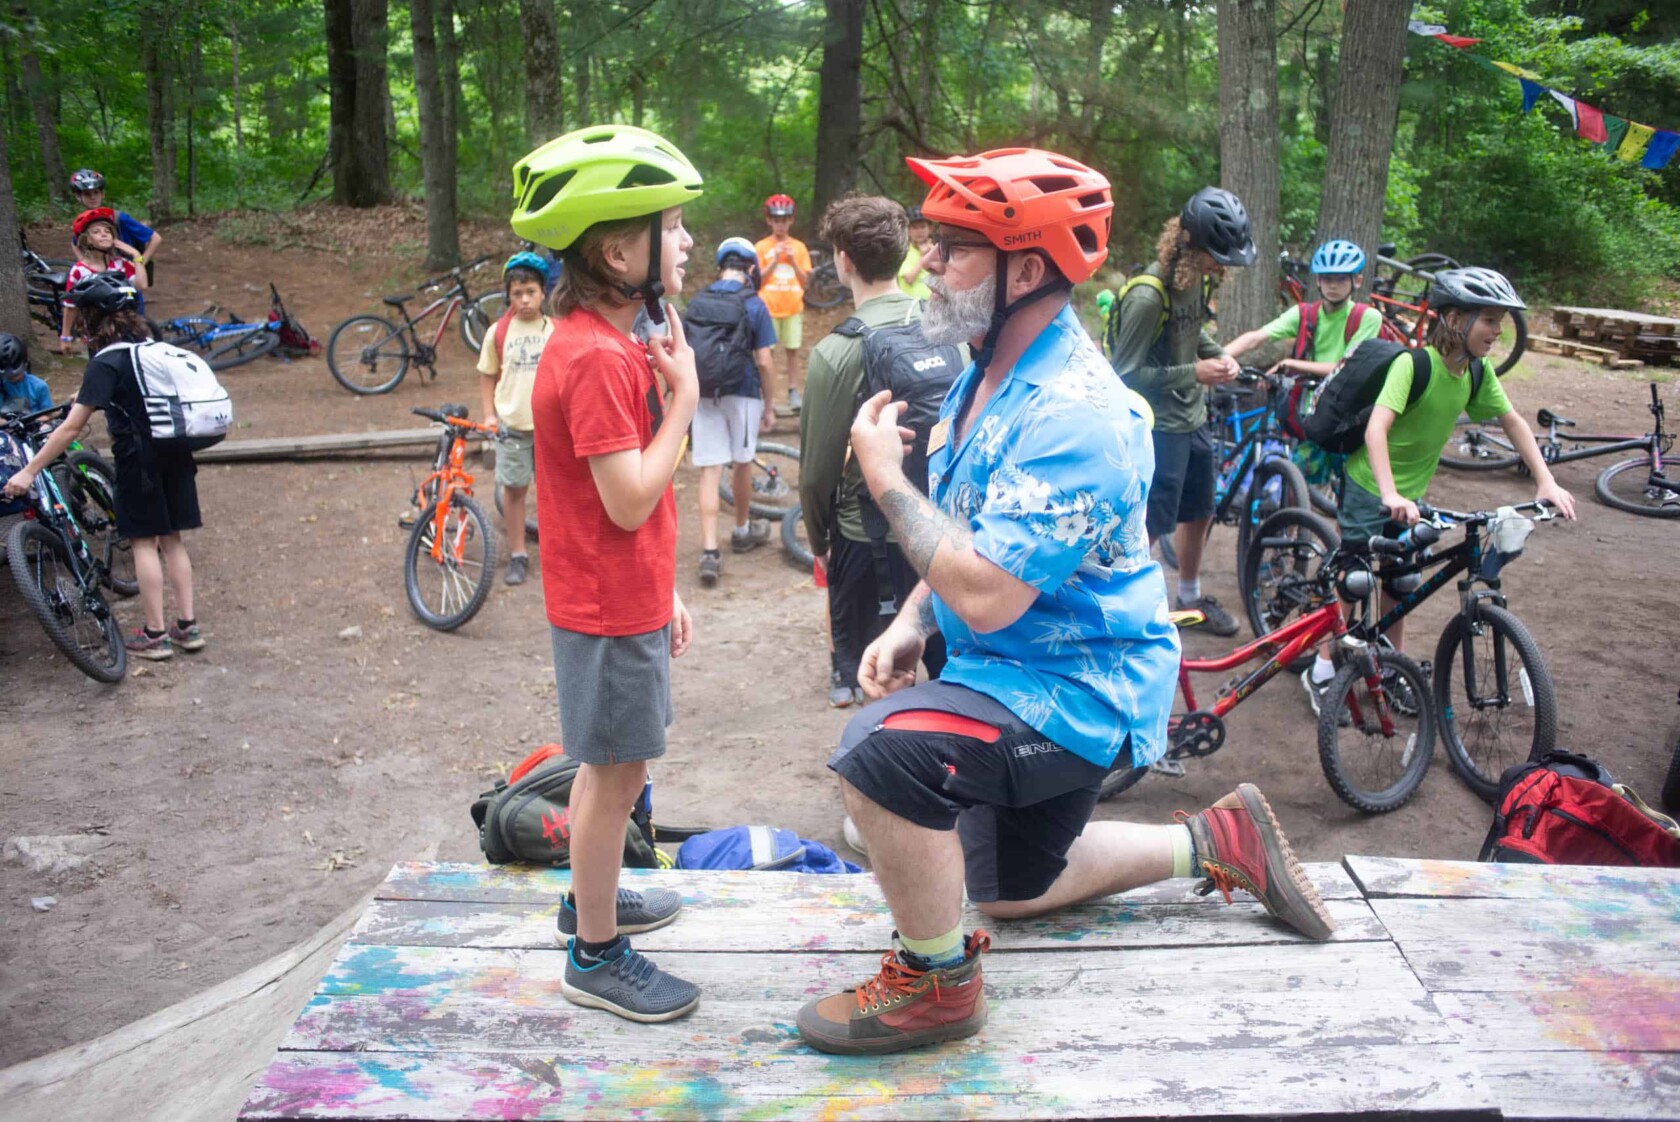 A man is talking to a boy while wearing a helmet.